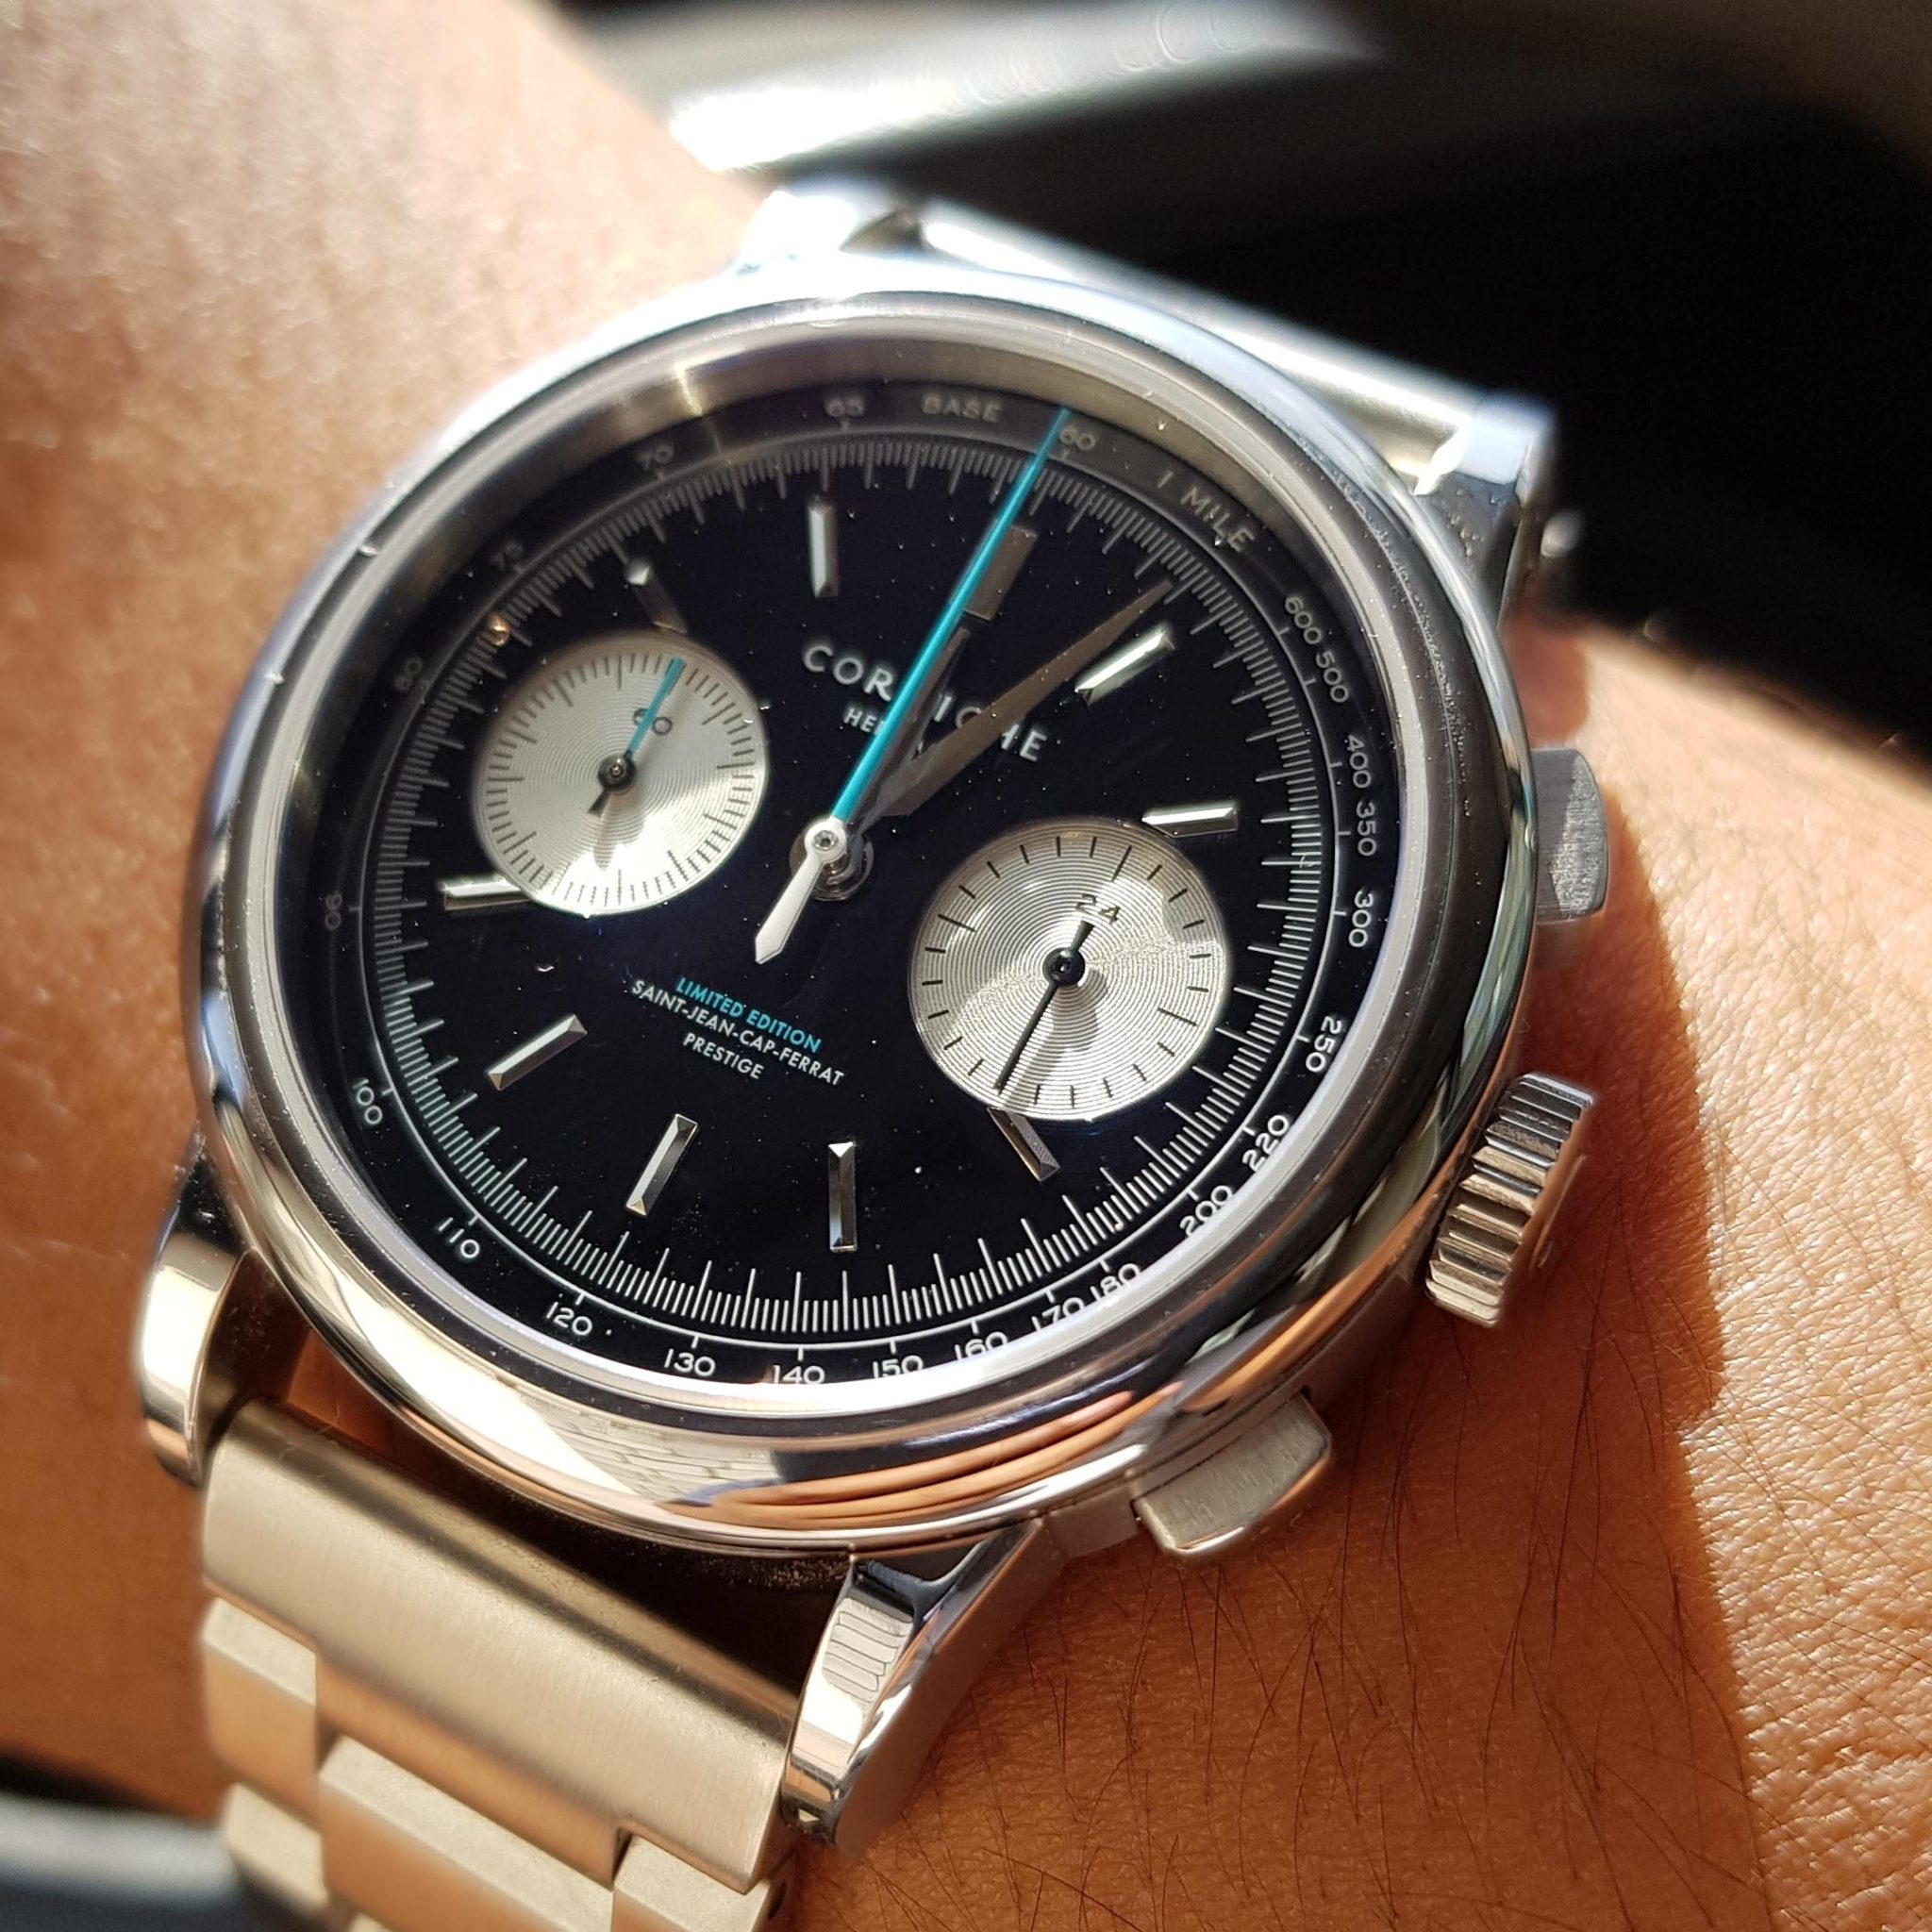 Owner Review: The only sun in the UK summer a Corniche Chronograph